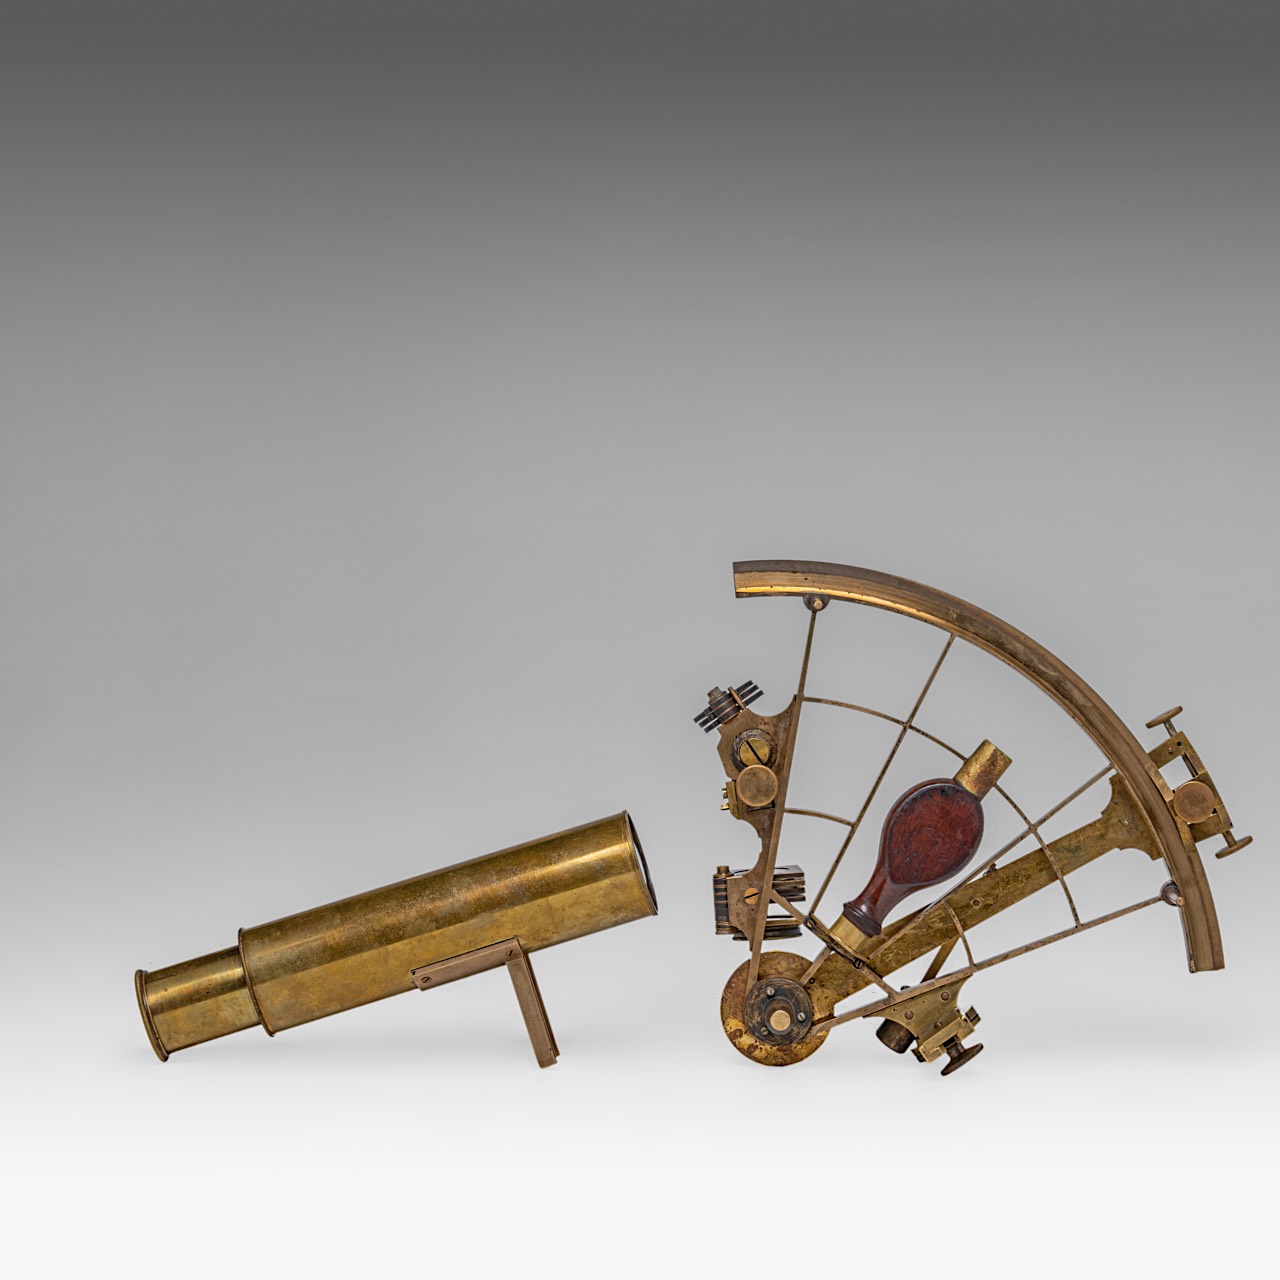 A late 19thC French sextant and binoculars, by A. Hurlimann, Paris - Image 4 of 7